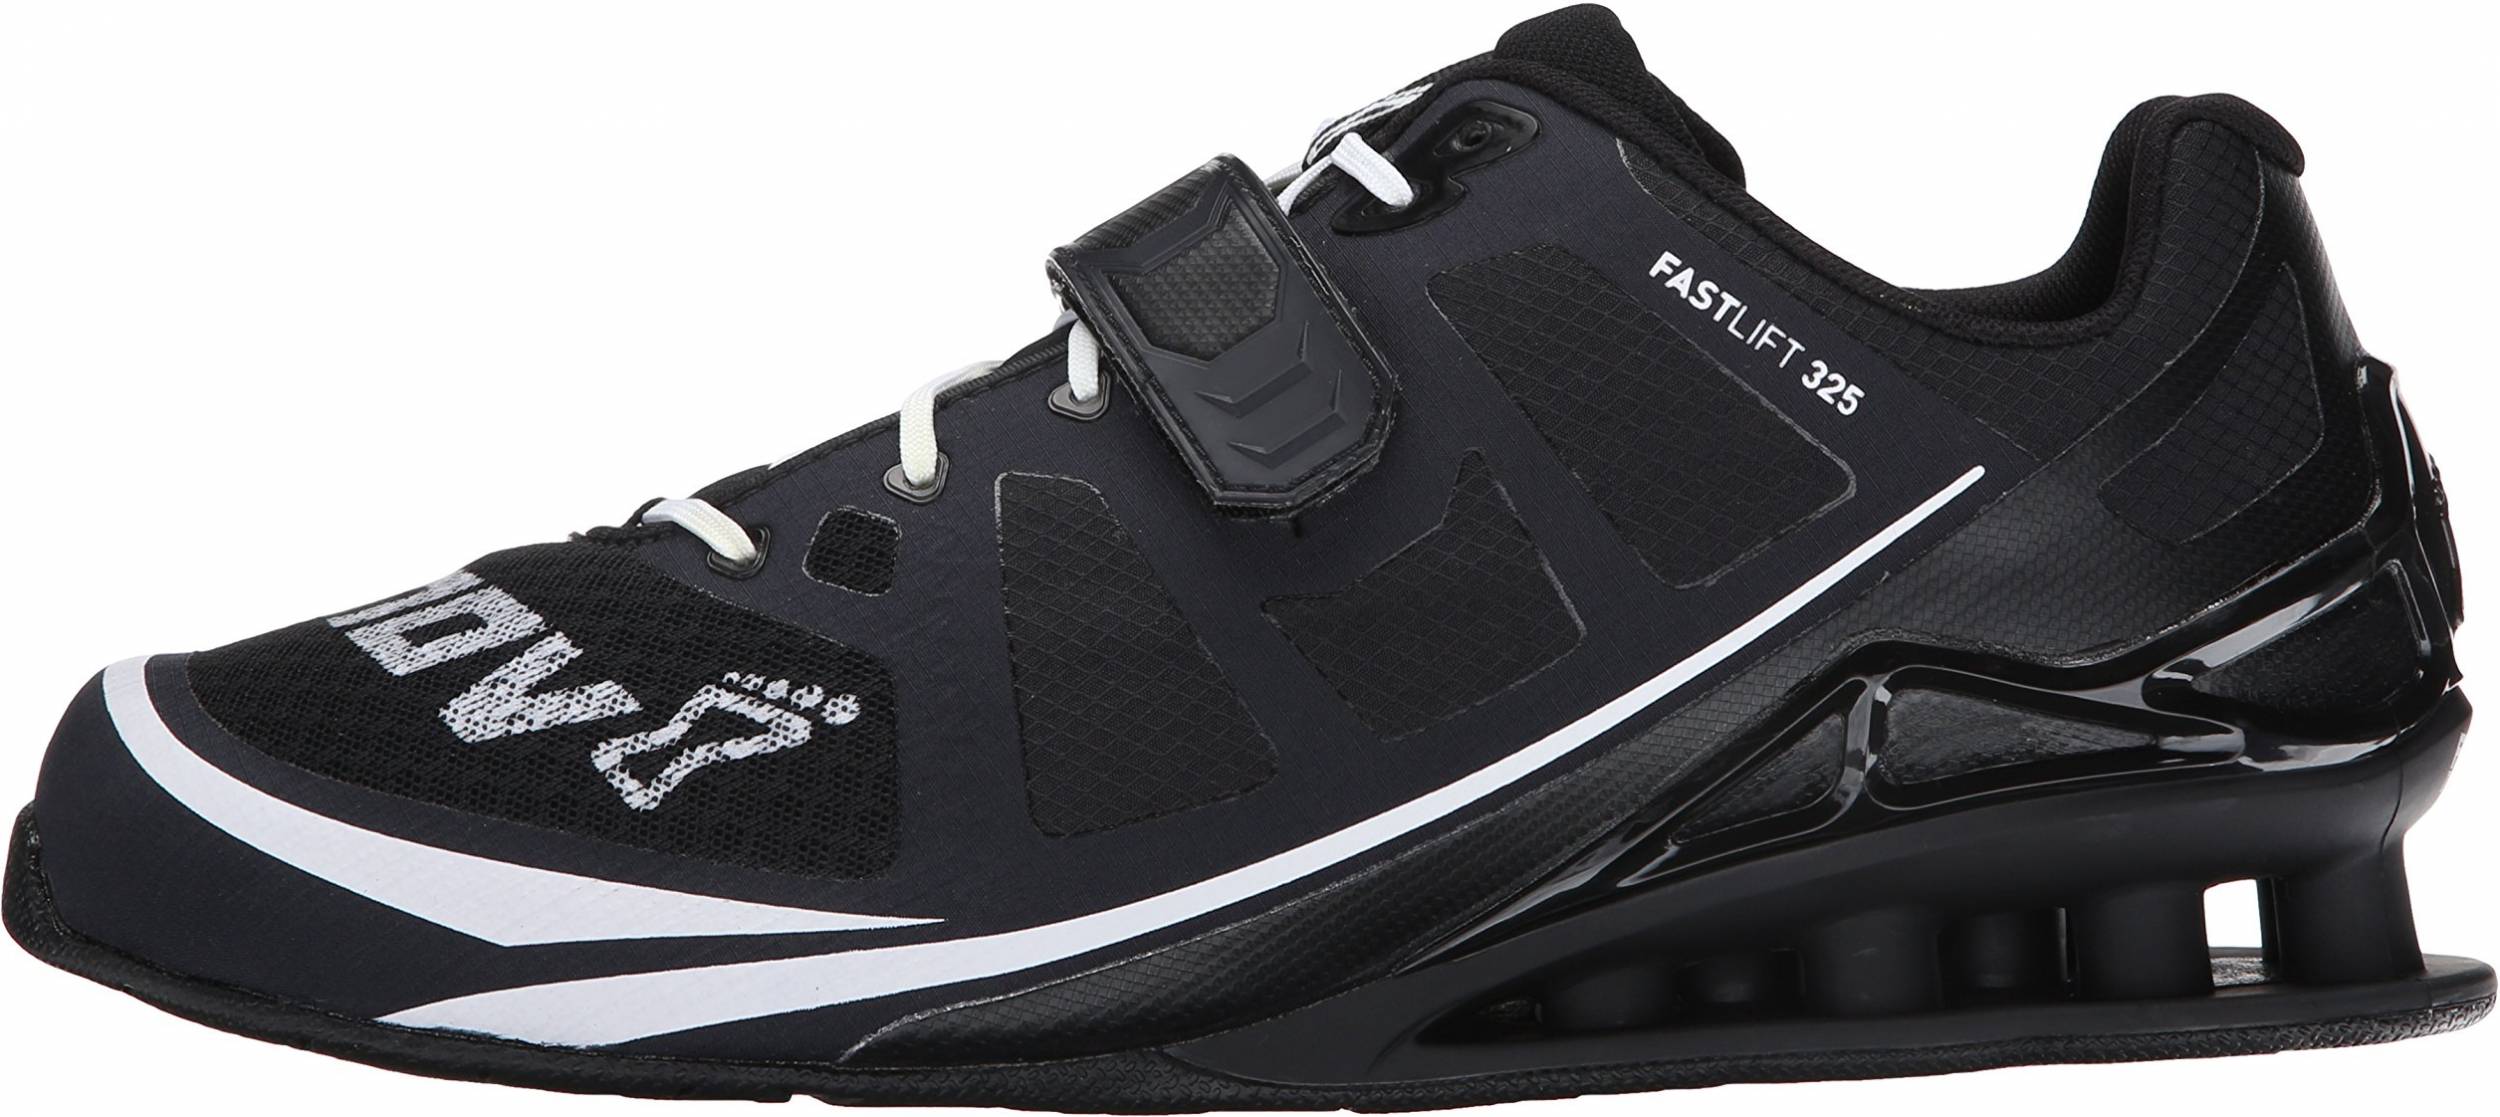 Save 57% on Weightlifting Shoes (24 